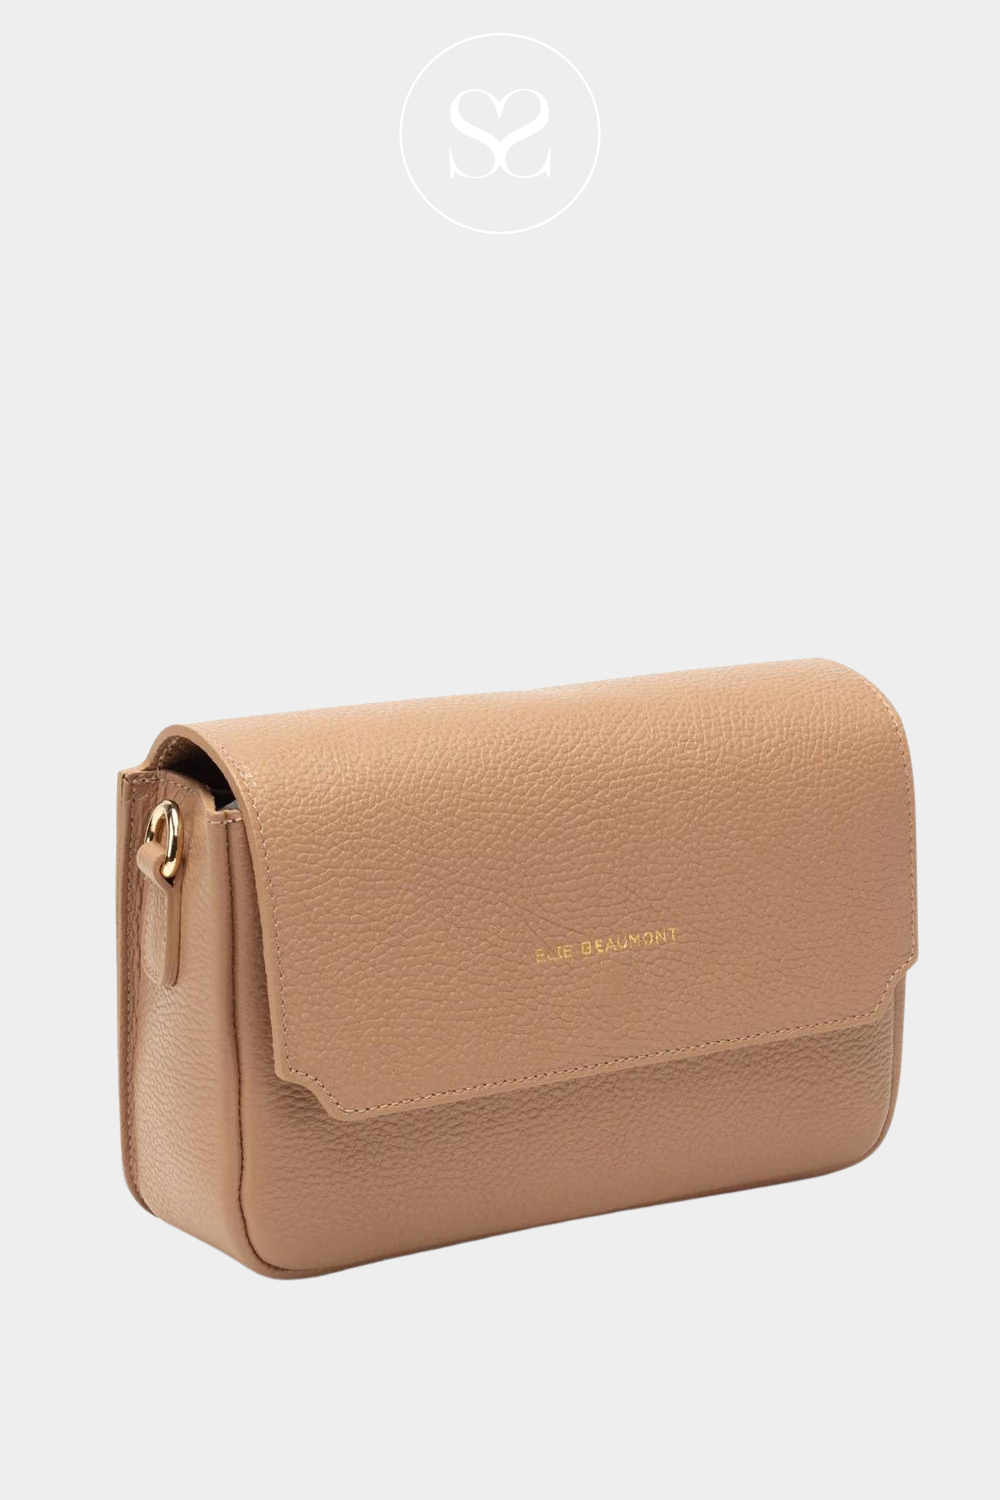 Everyday crossbody bag with fold over flap in Camel tone from Elie Beaumont